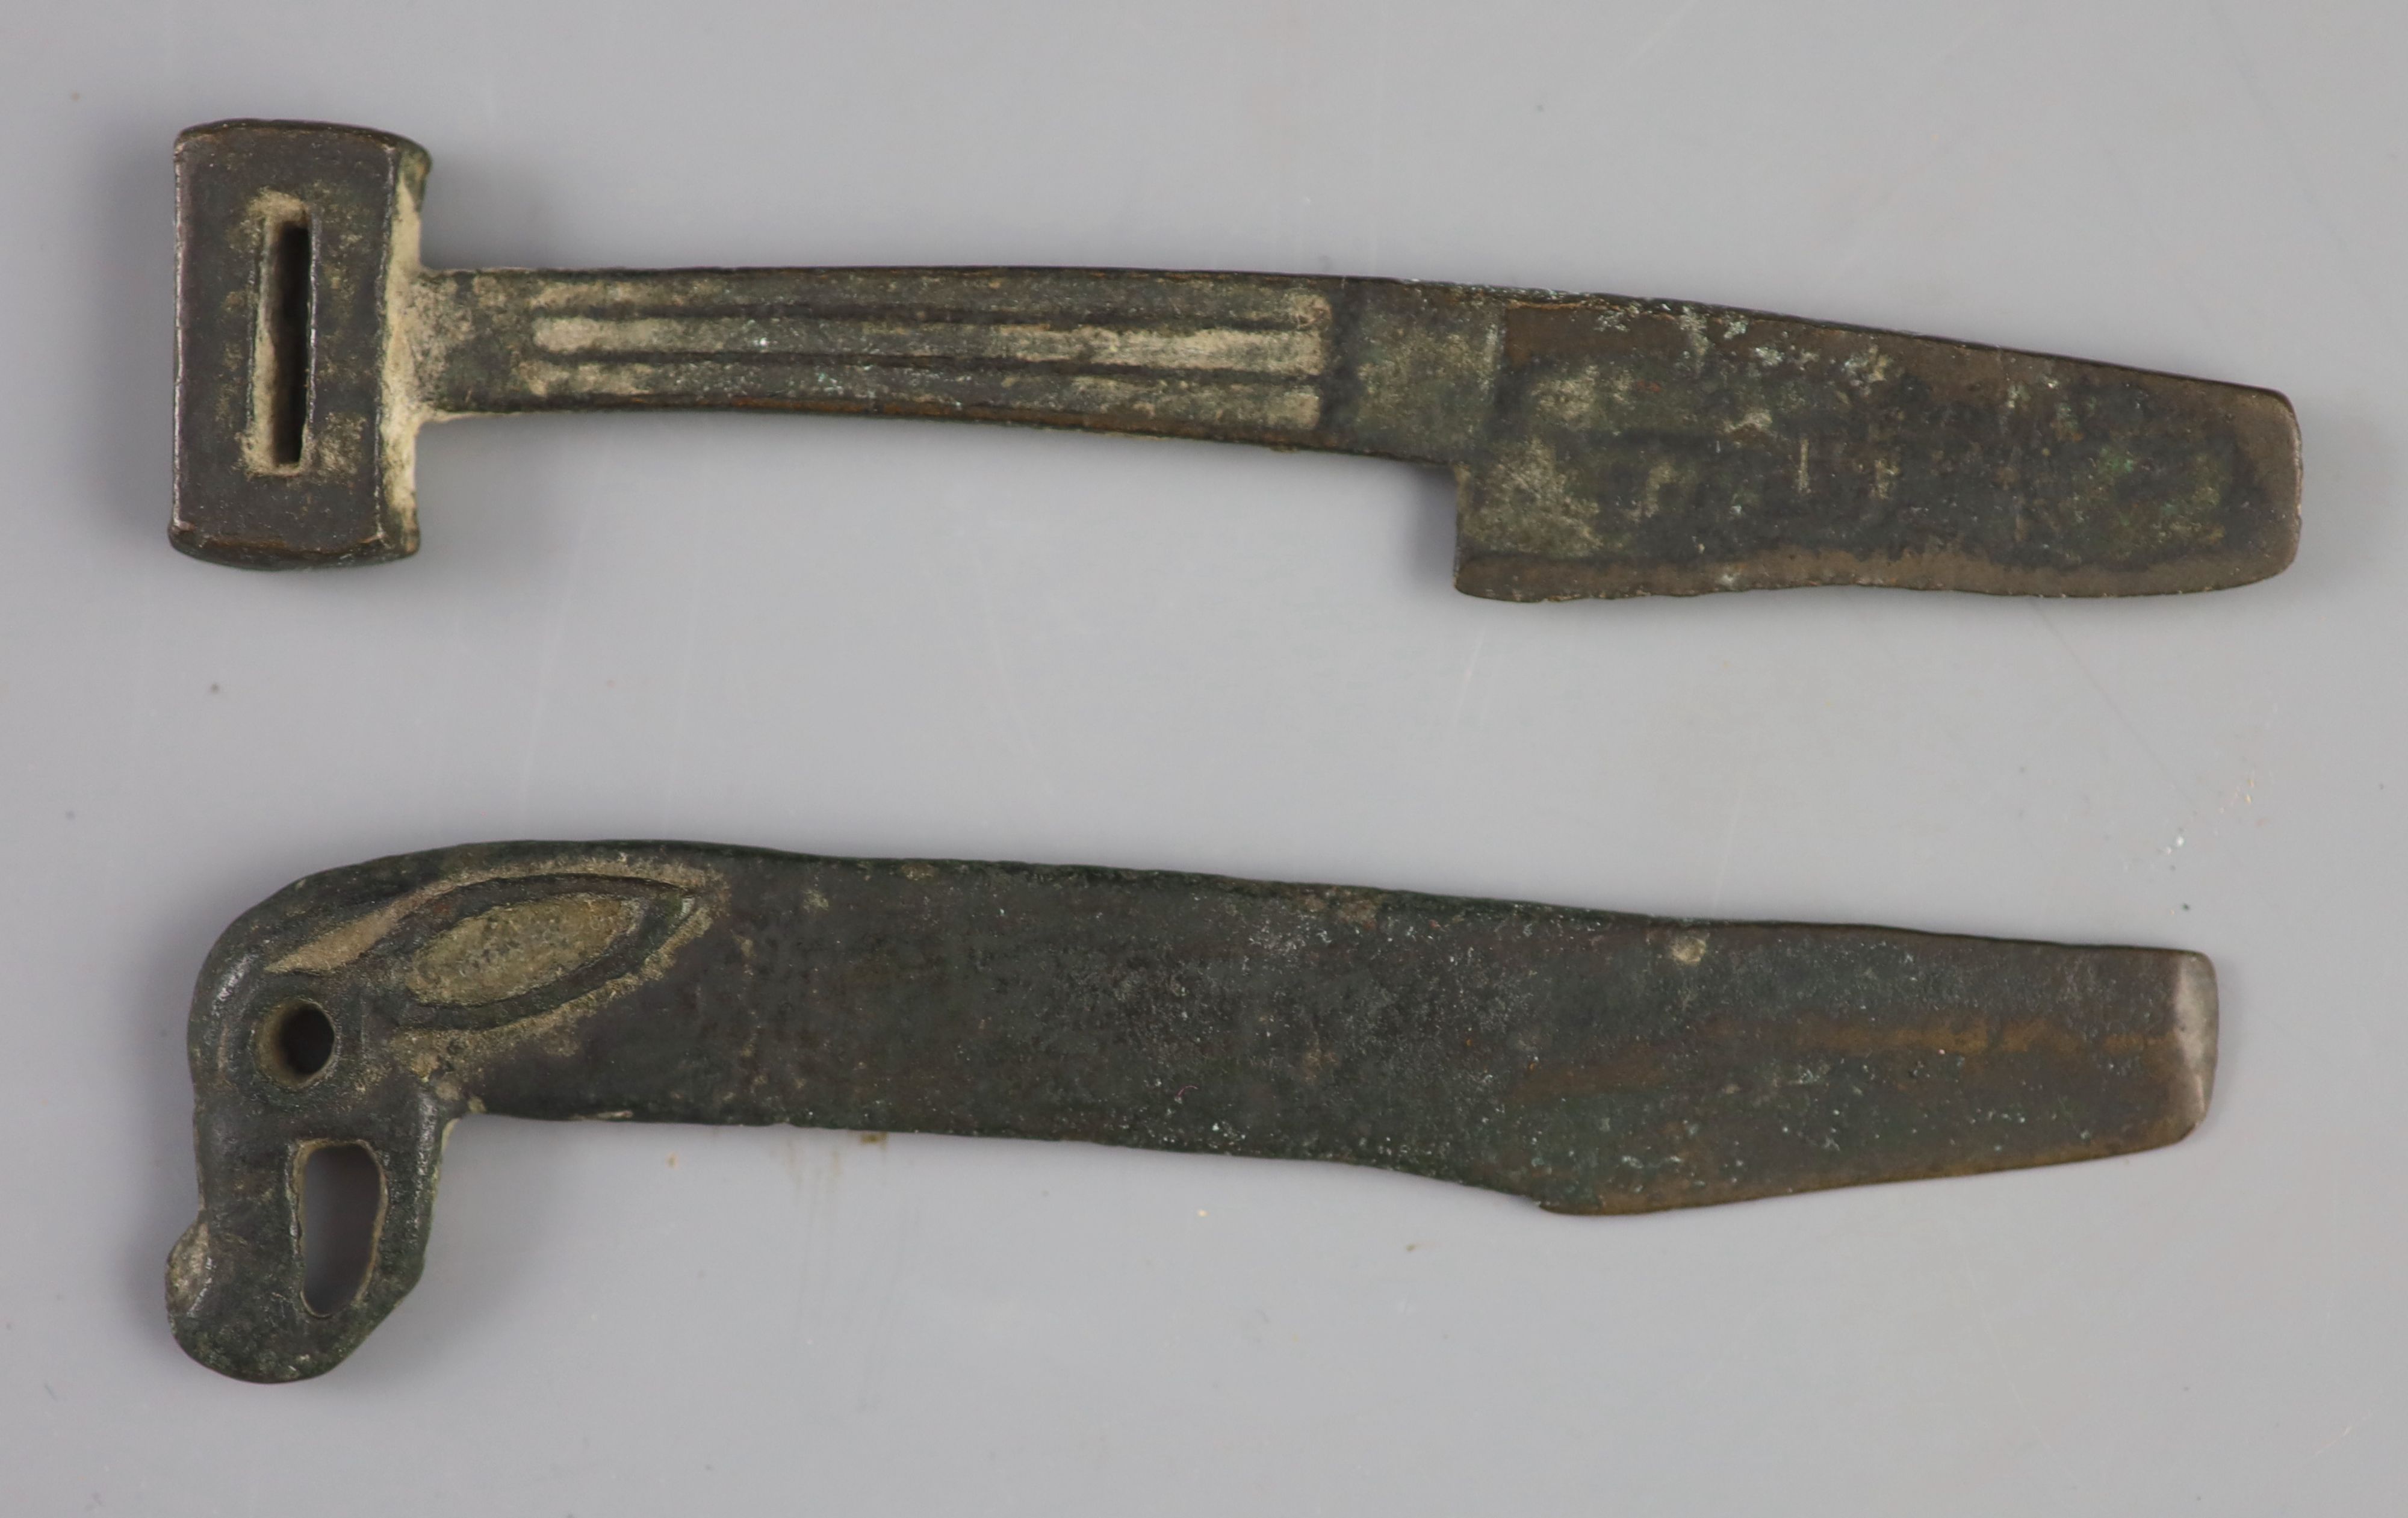 Two Chinese bronze knives, Ordos Culture, c.3rd century B.C.